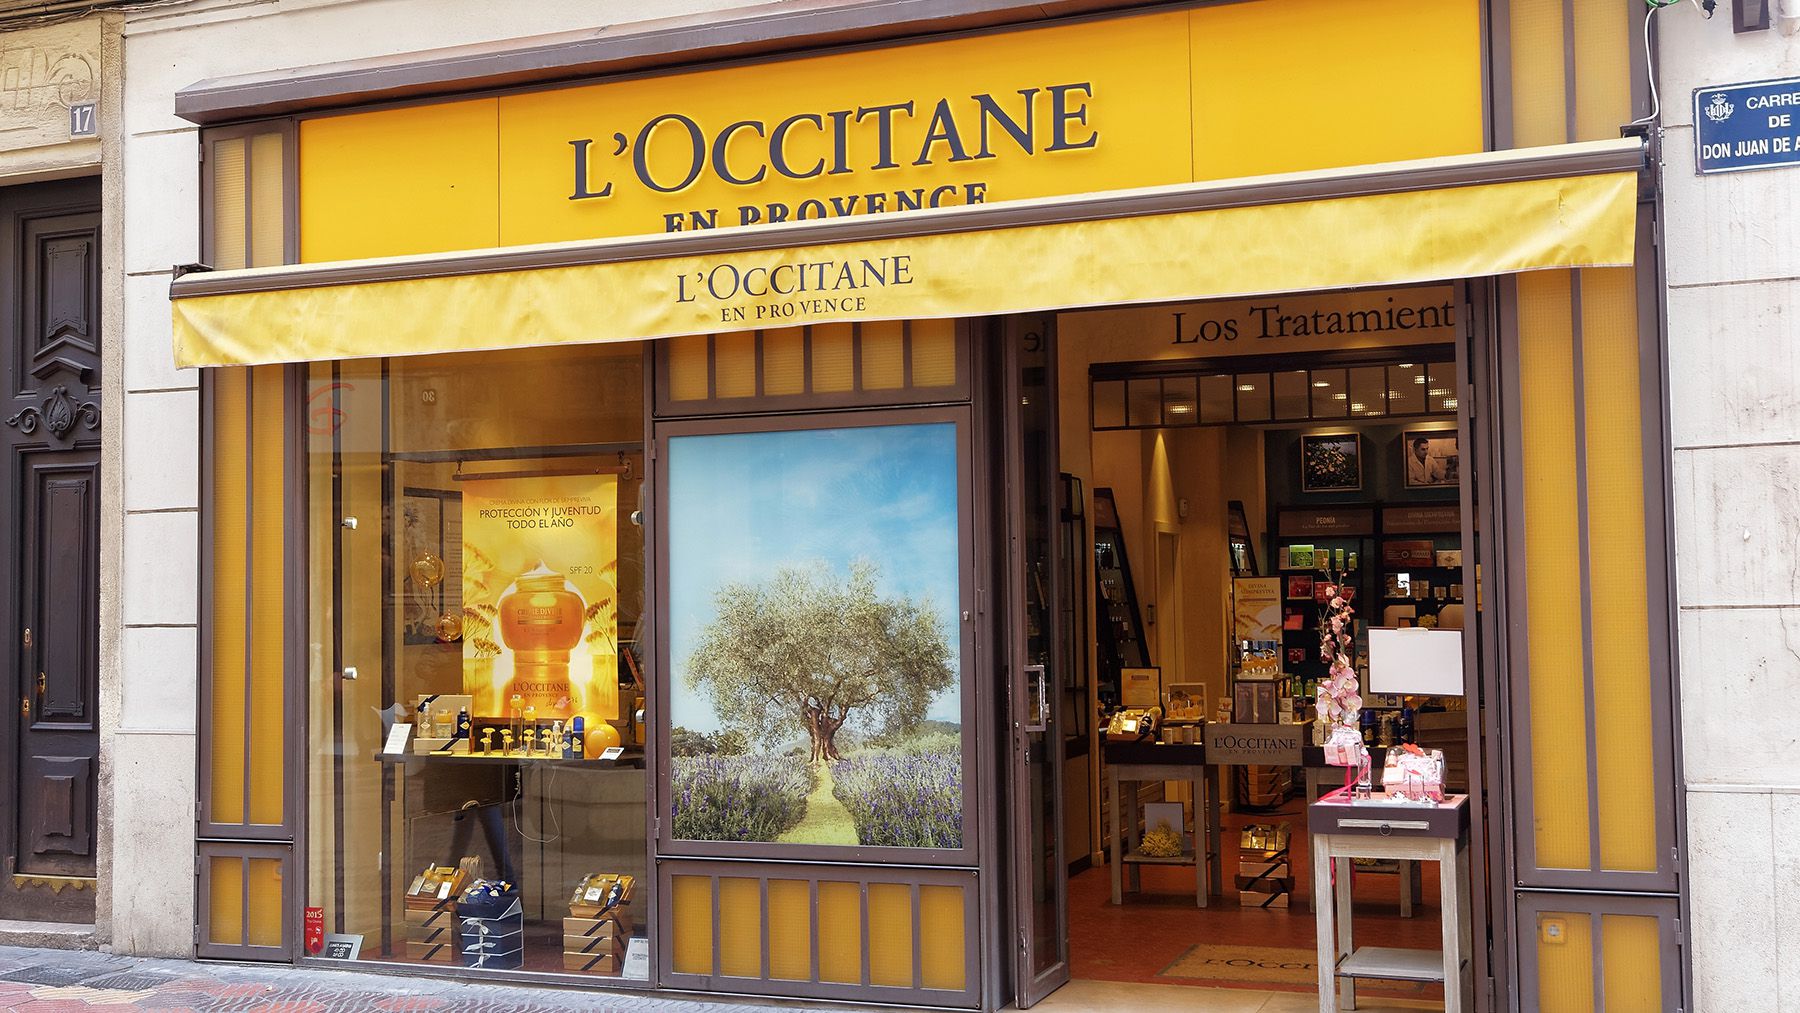 L’Occitane Owner Said to Mull Buyout of $4 Billion Beauty Firm